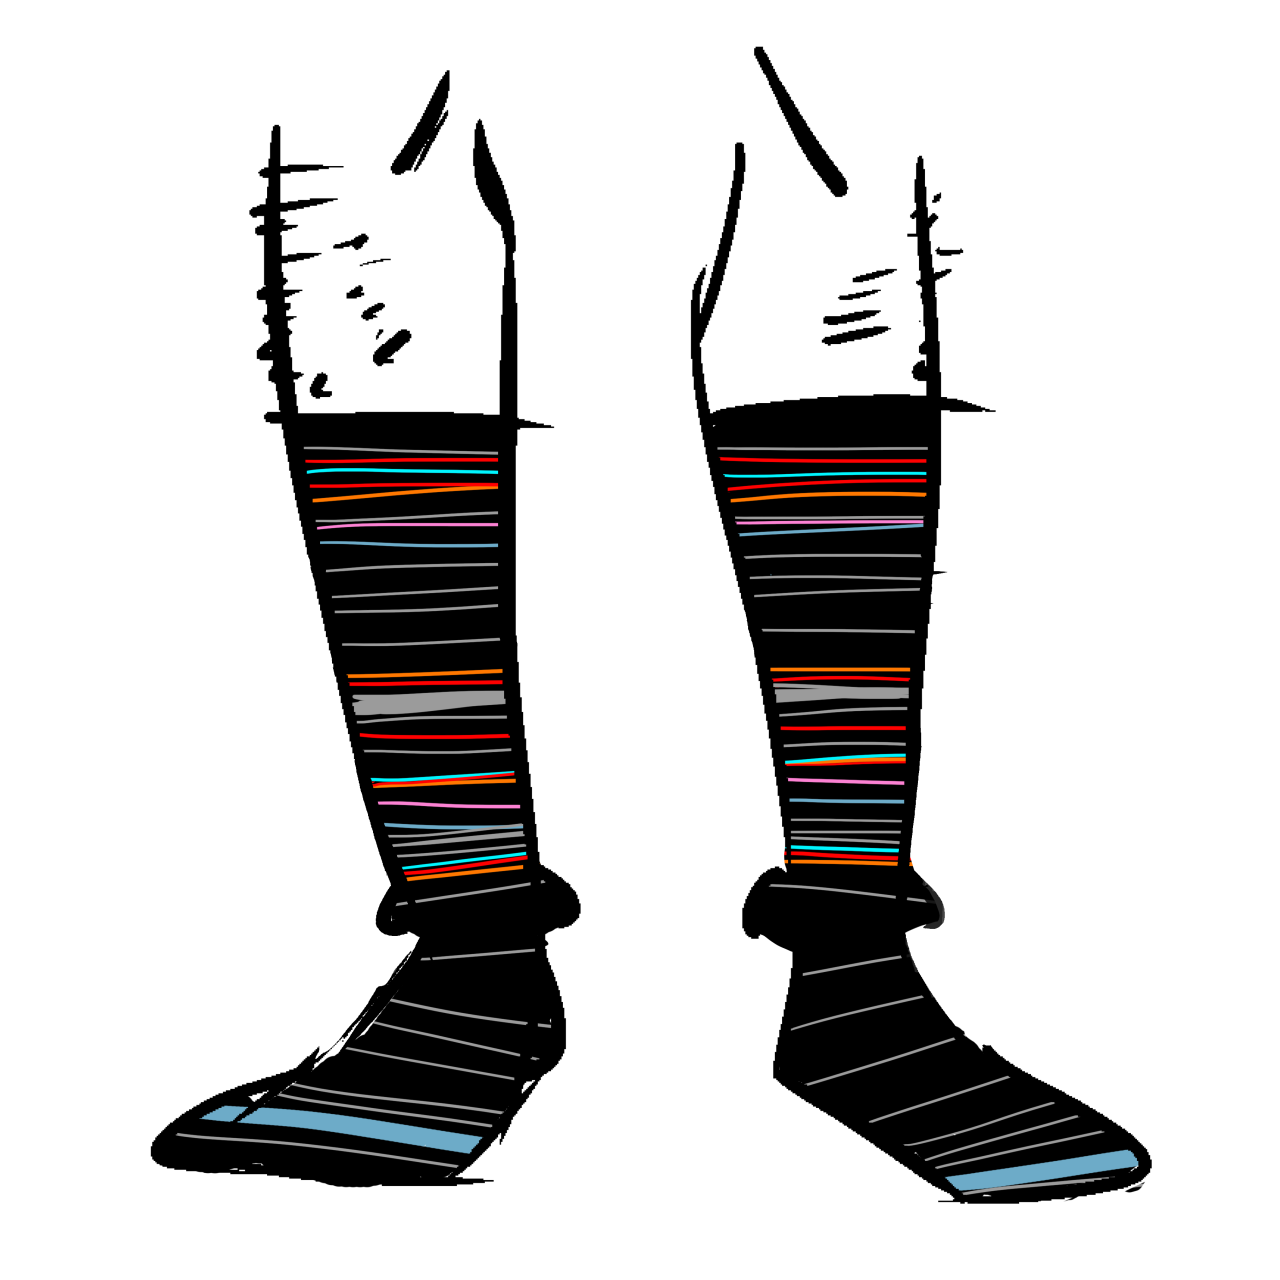 Black socks with thin stripes of red, purple, grey, and blue